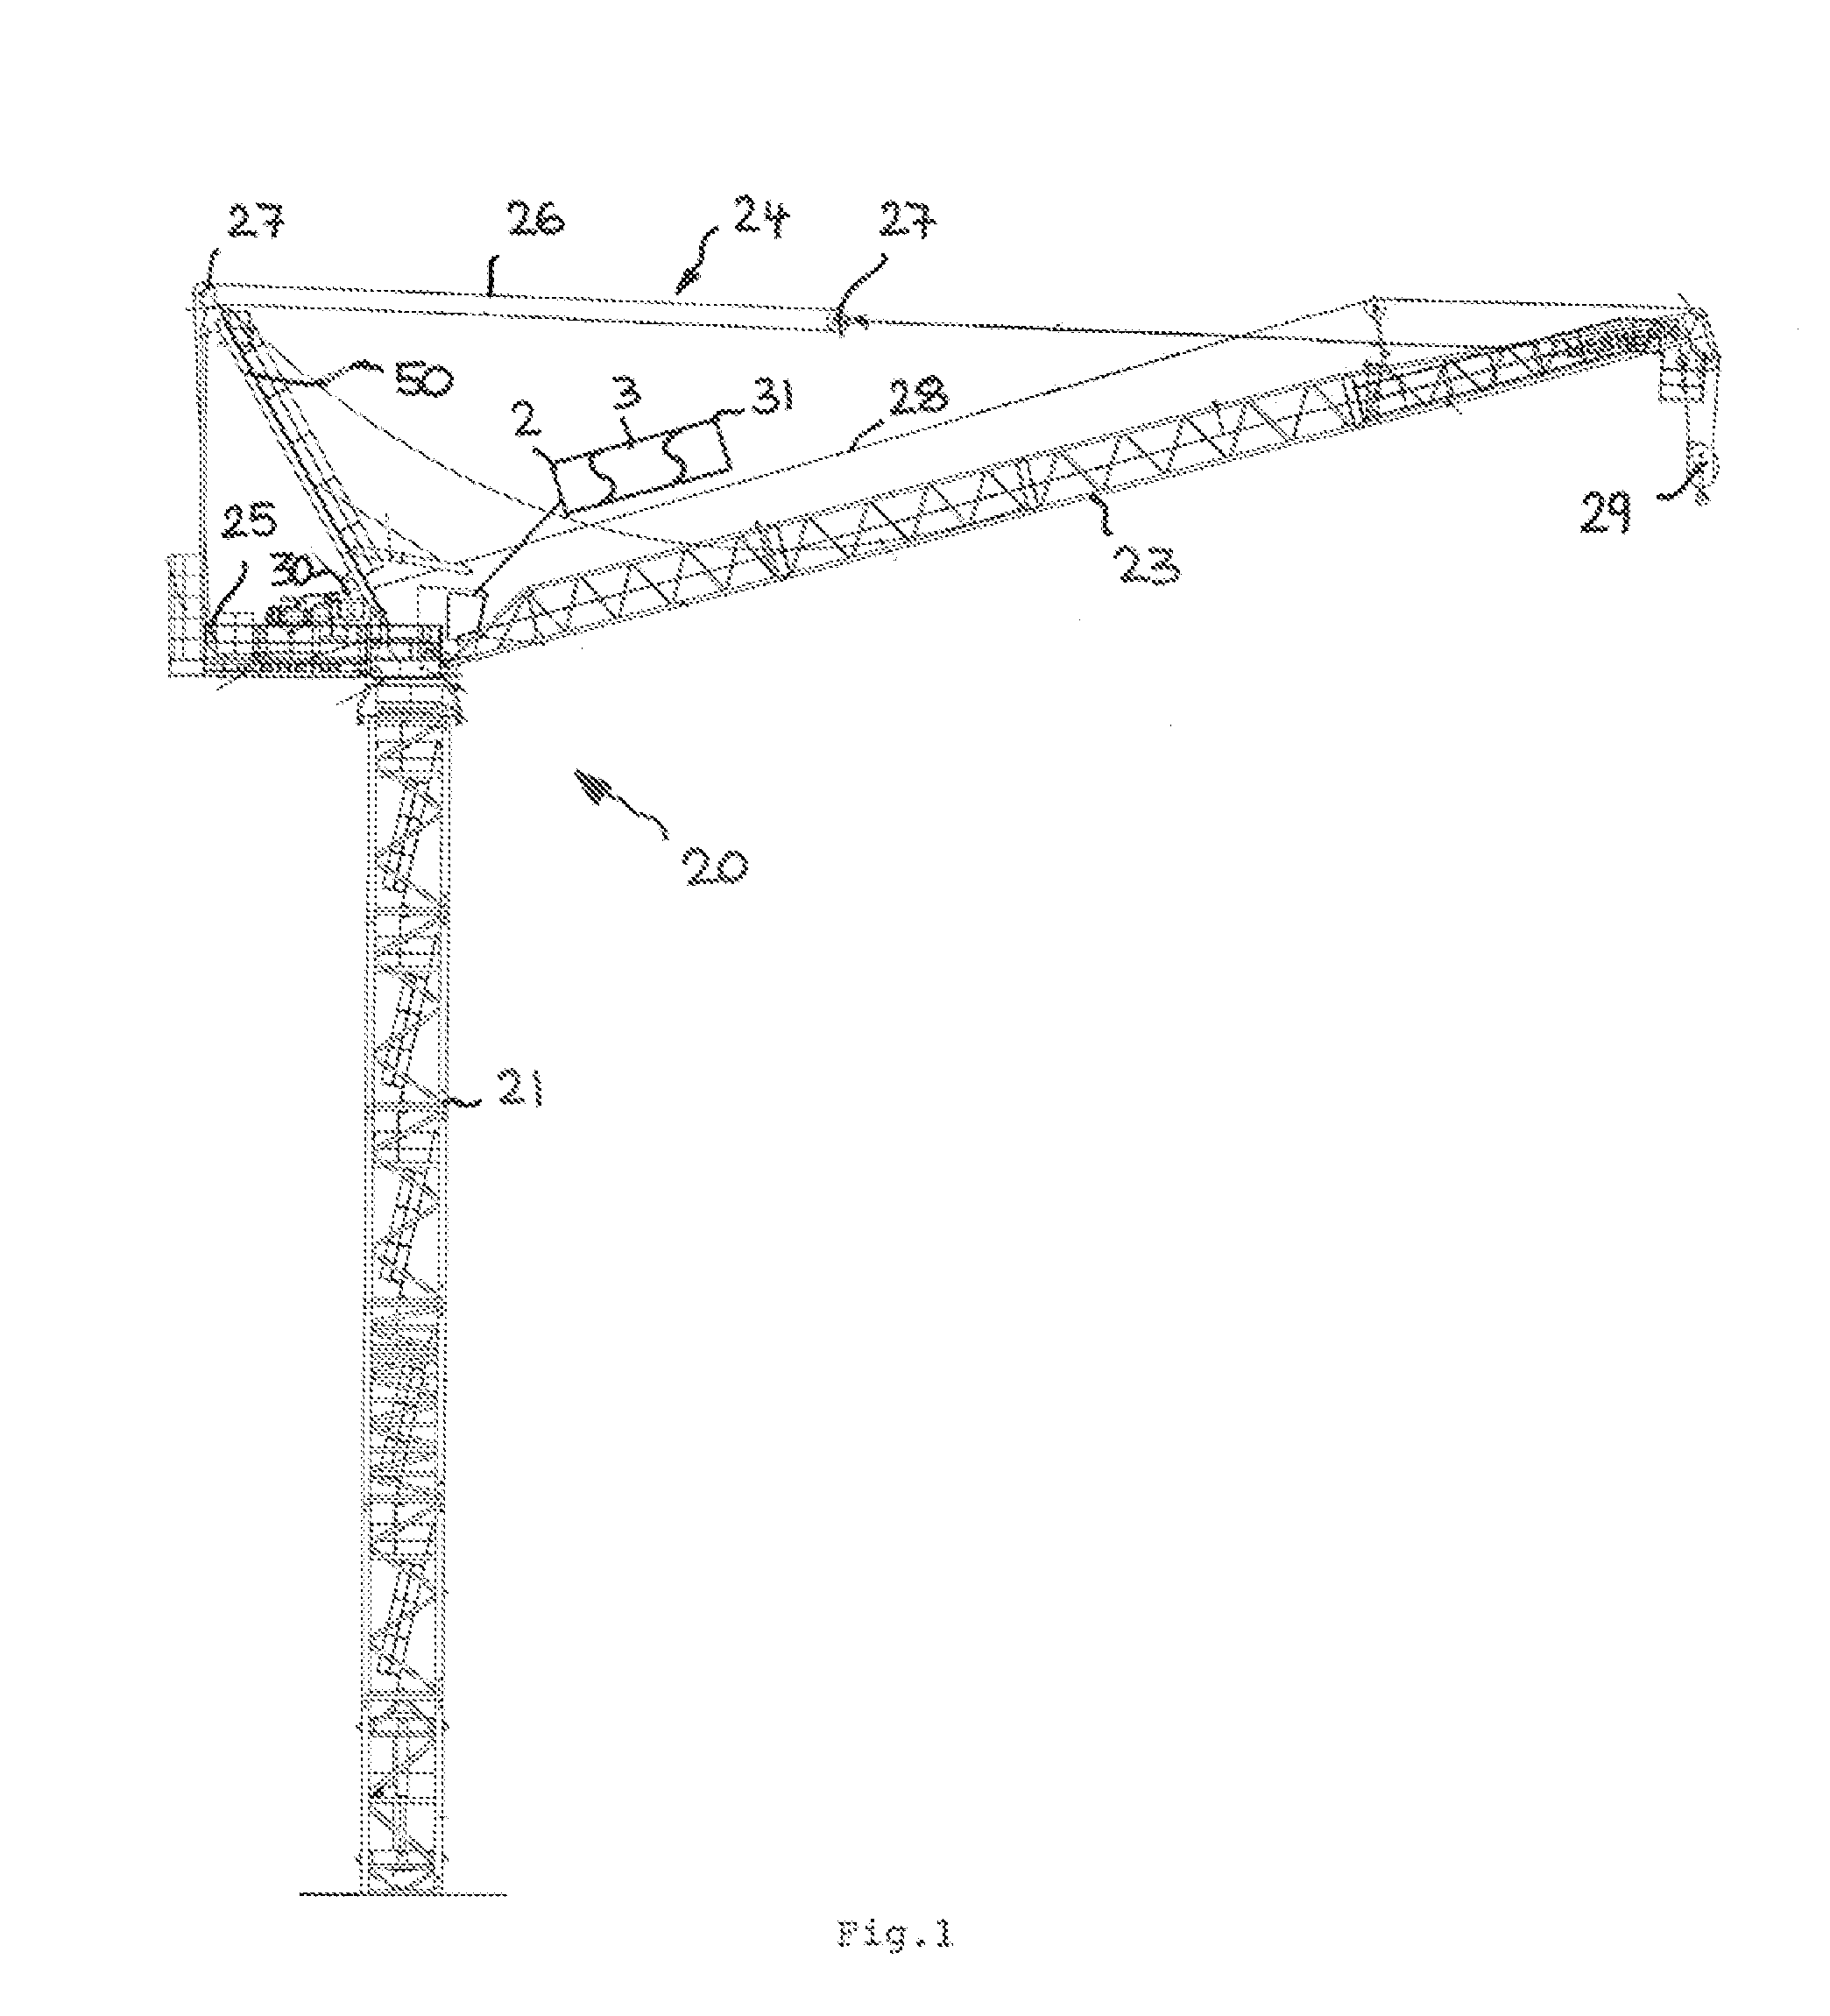 Apparatus for recognizing the discard state of a high-strength fiber rope in use in lifting gear